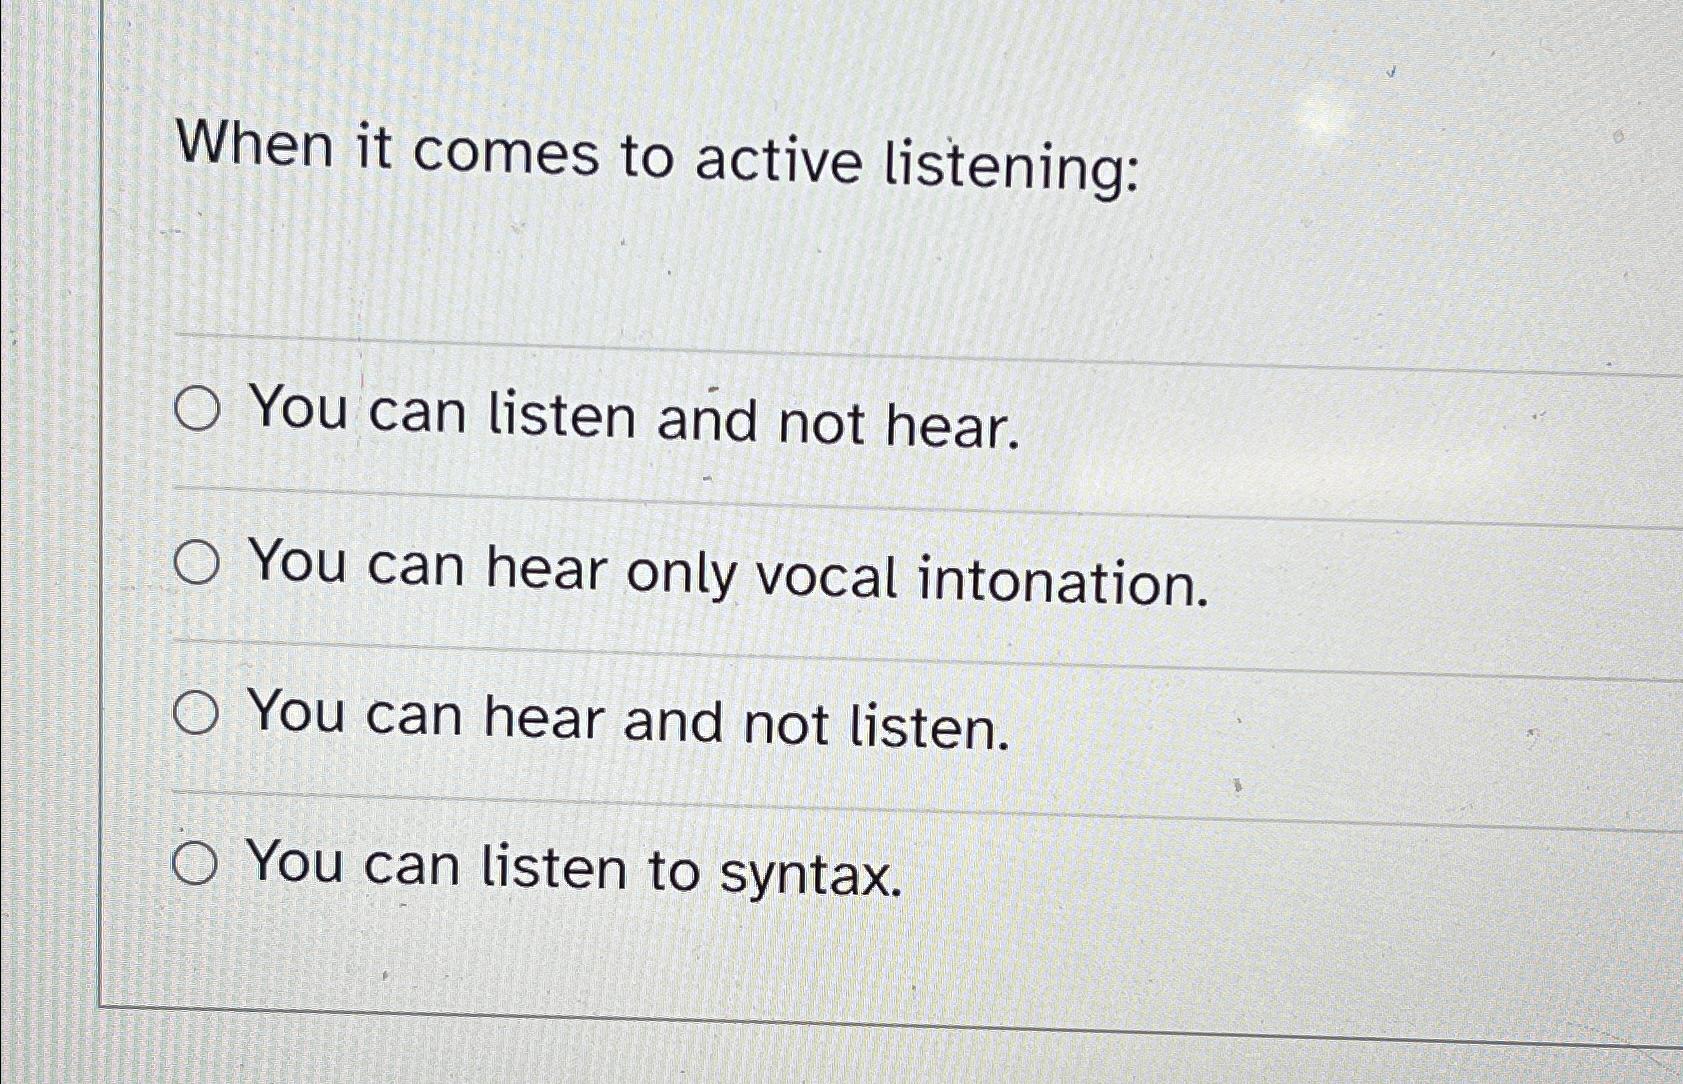 When it comes to active listening: O You can listen and not hear. O You can hear only vocal intonation. O You